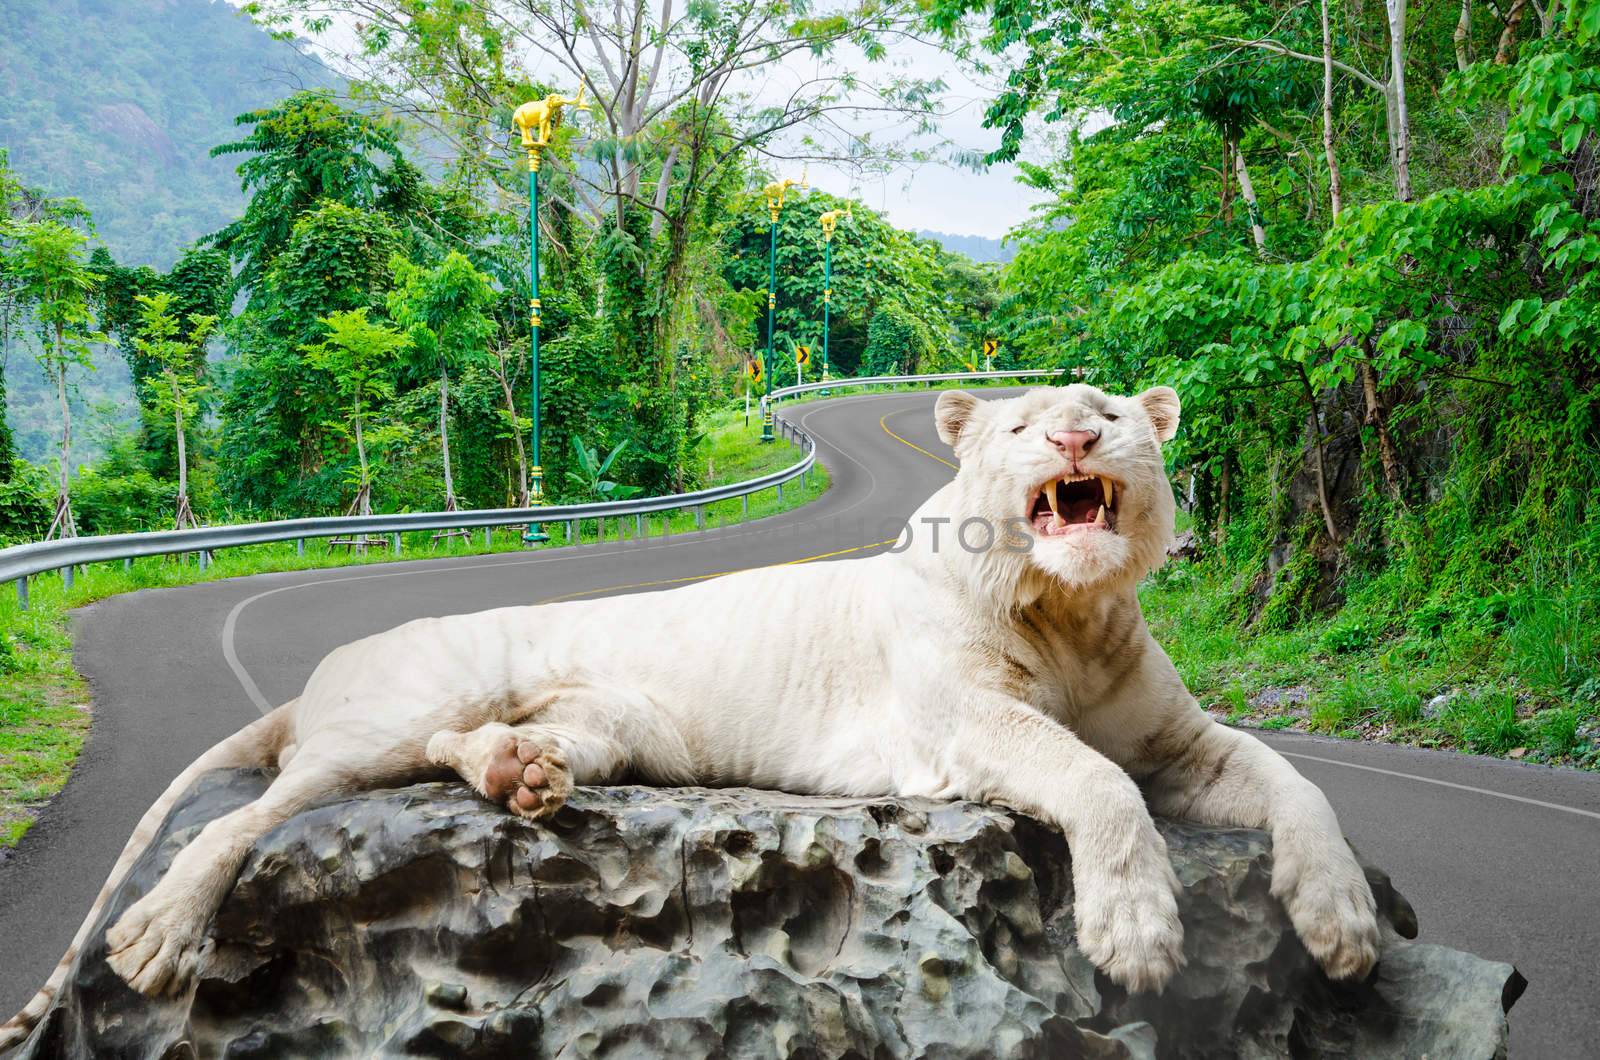 the white tiger growls. by Gamjai